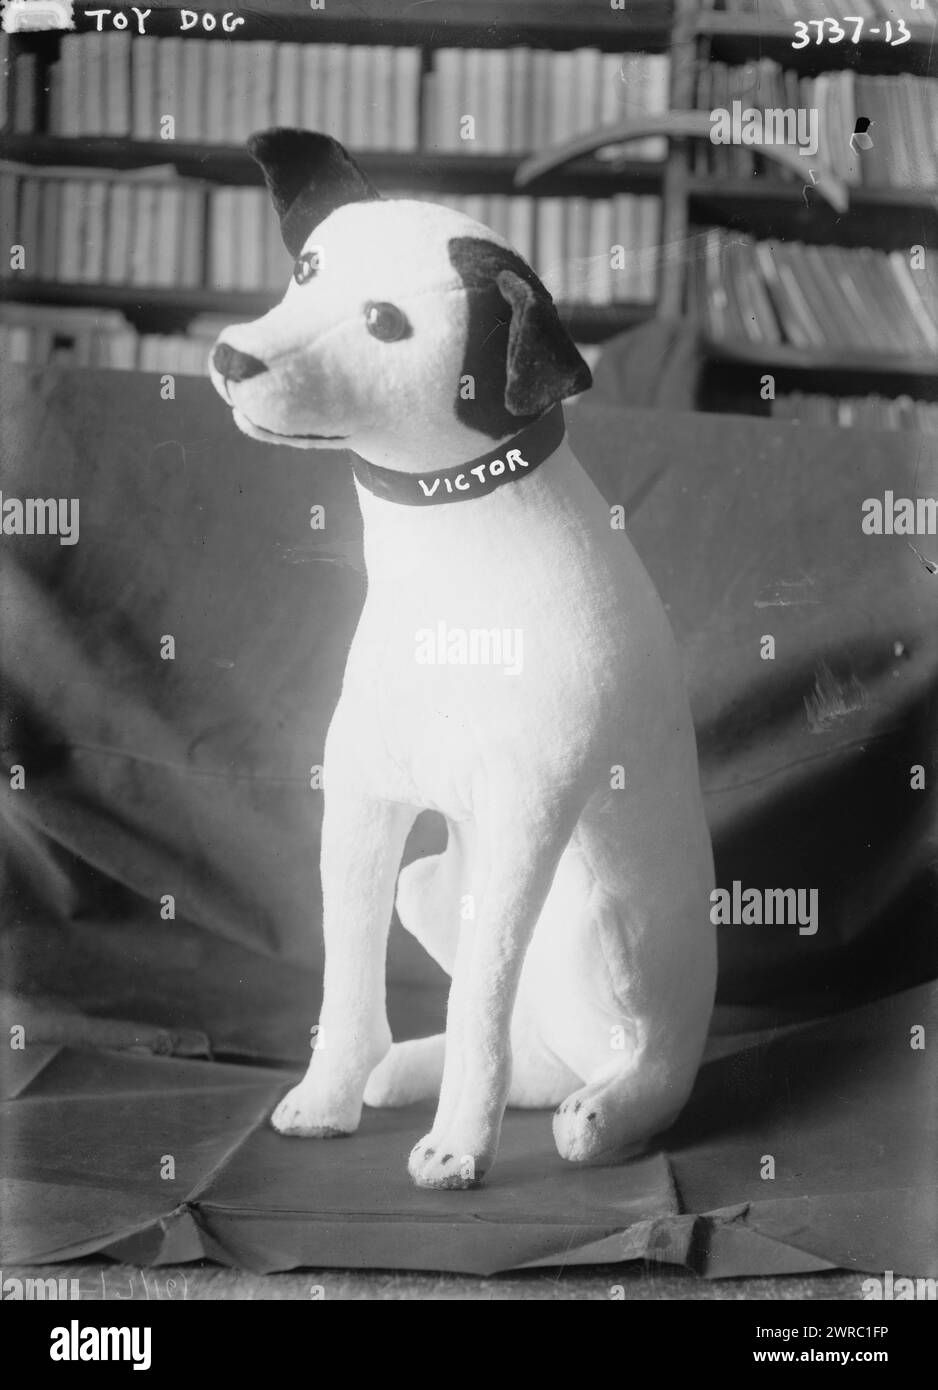 Toy dog Victor, Photograph shows a stuffed toy version of the dog 'Nipper' (1884-1895) who became famous as the advertising symbol for a number of audio recording companies including RCA Victor., between ca. 1910 and ca. 1920, Glass negatives, 1 negative: glass Stock Photo